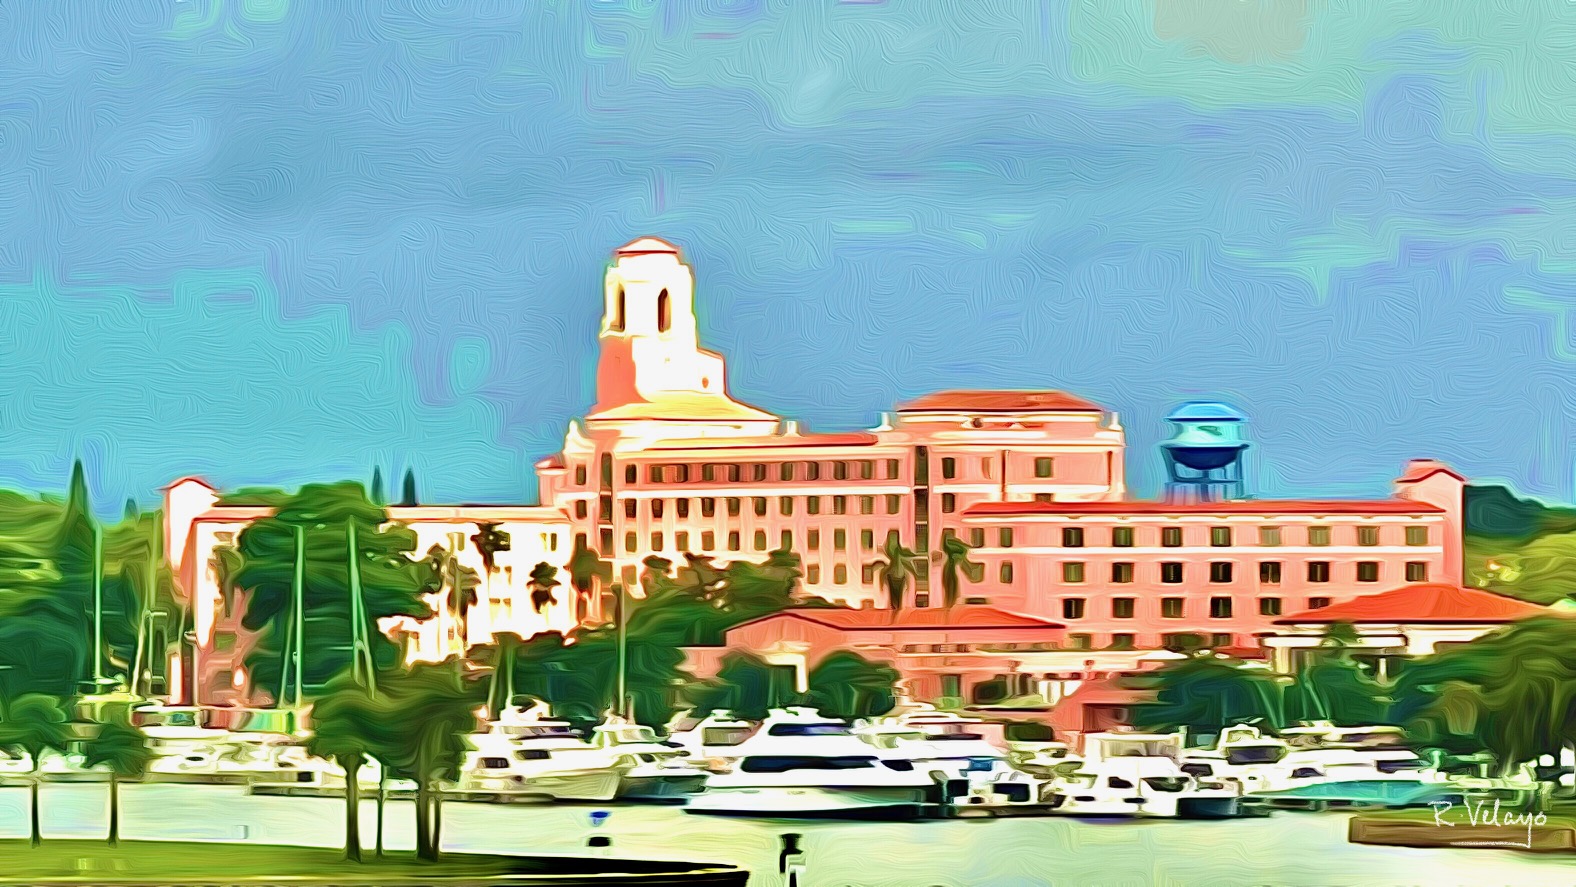 "VIEW OF THE VINOY FROM ST. PETE PIER" [Created: 7/26/2022]